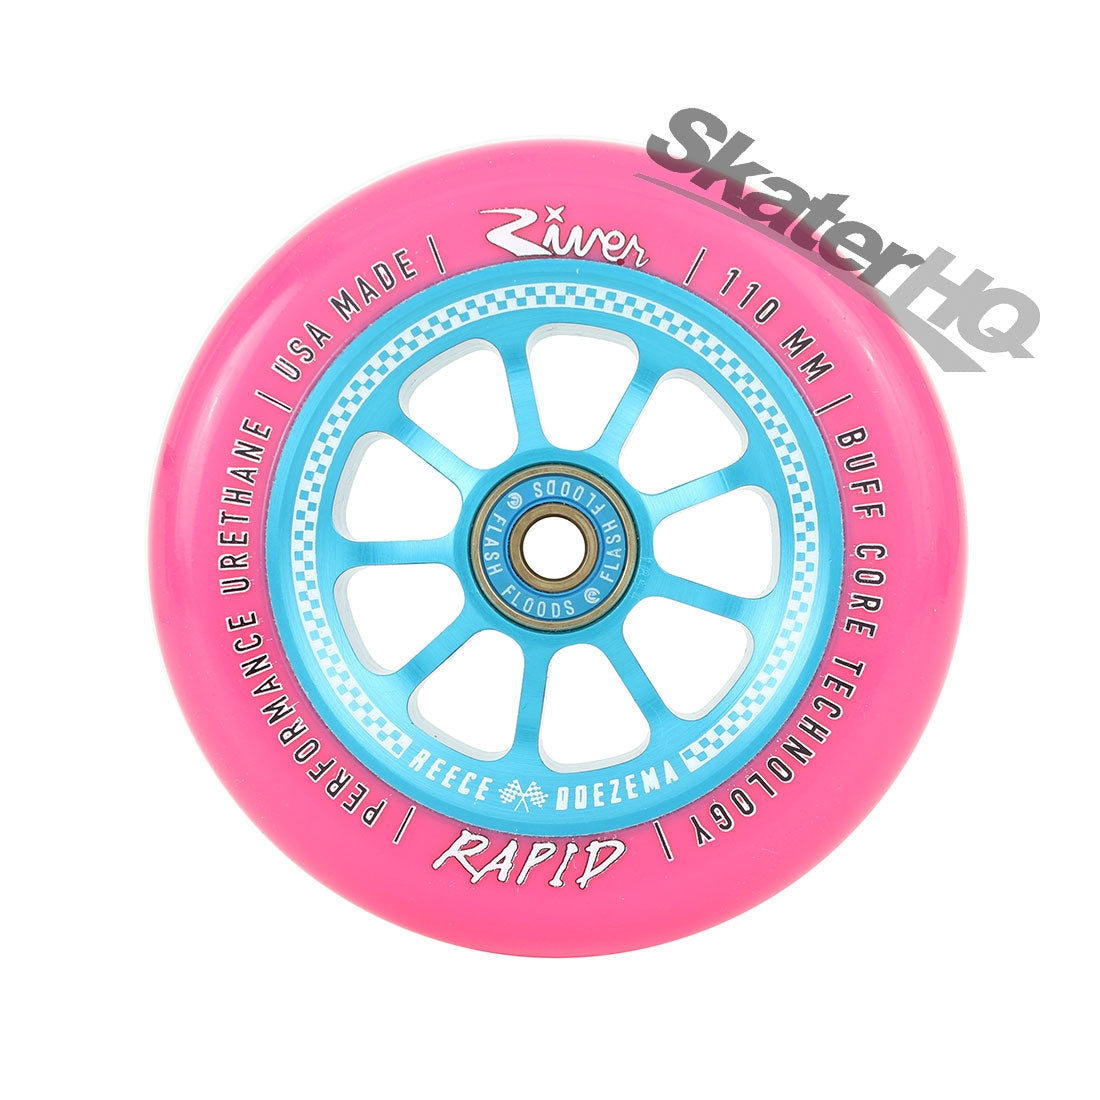 River Rapid Checkmate 110mm Wheel - Pink/Sapphire Scooter Wheels